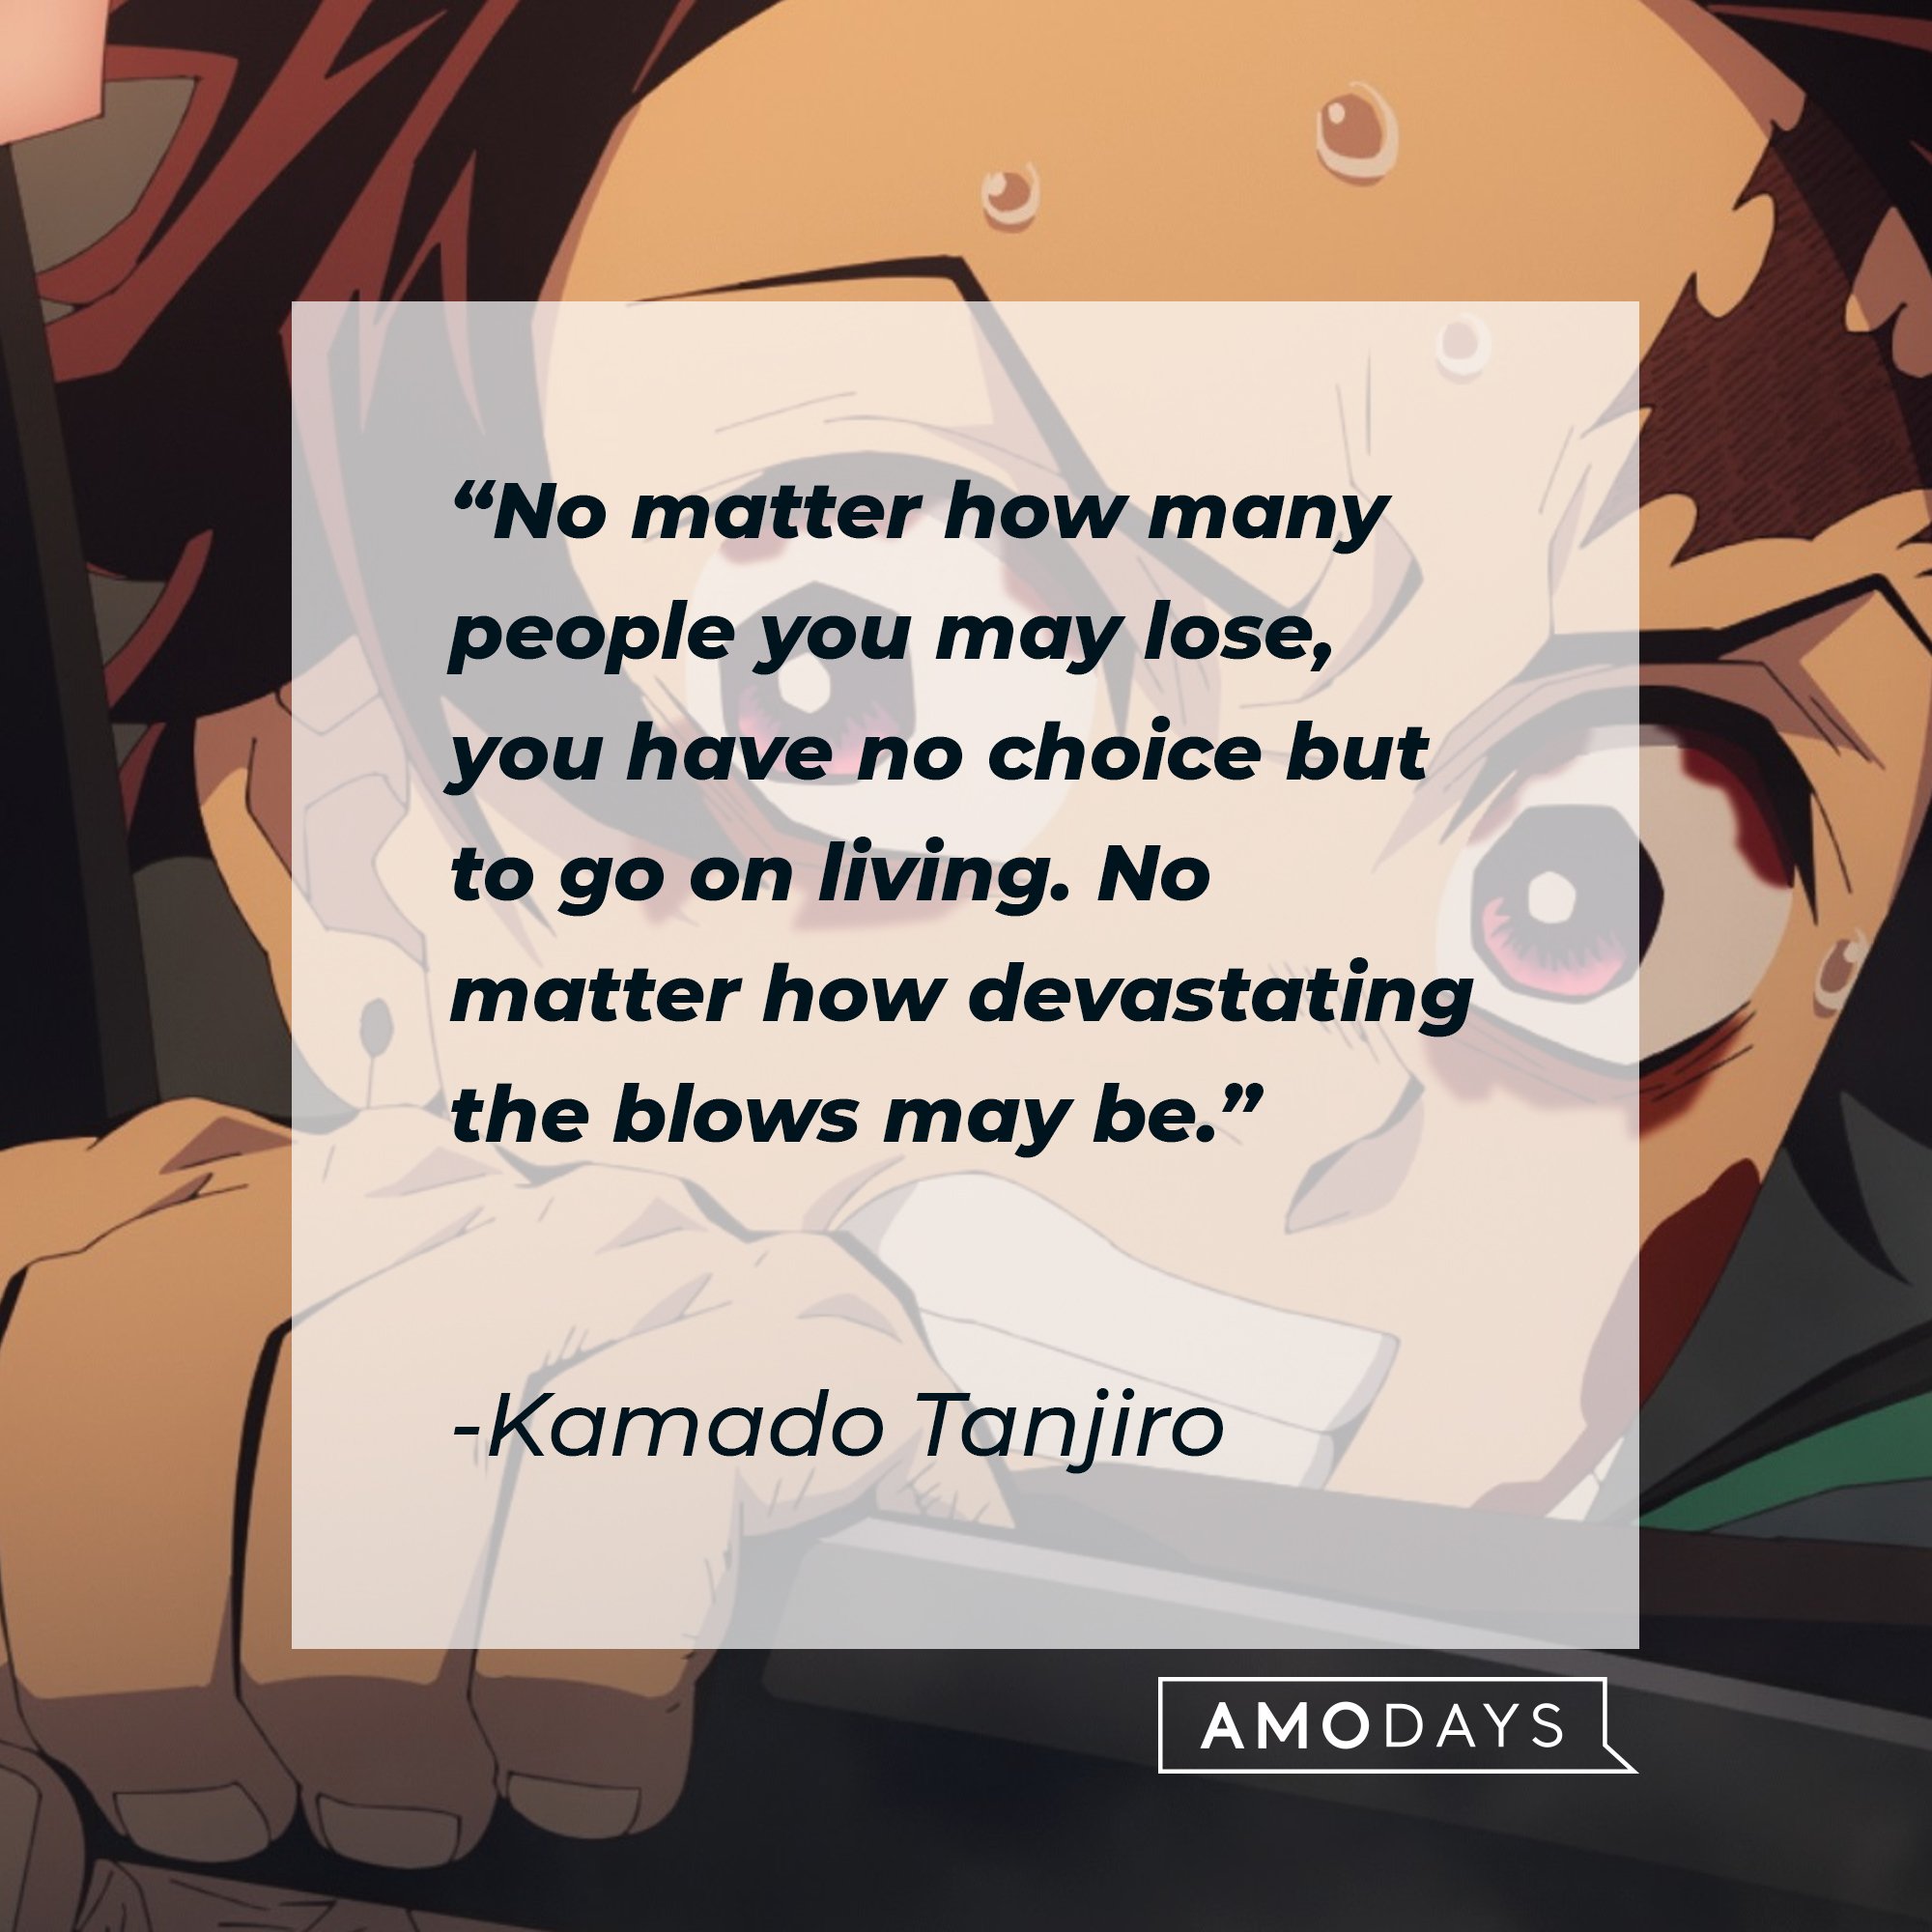 Kamado Tanjiro’s quote: "No matter how many people you may lose, you have no choice but to go on living. No matter how devastating the blows might be." | Image: AmoDays